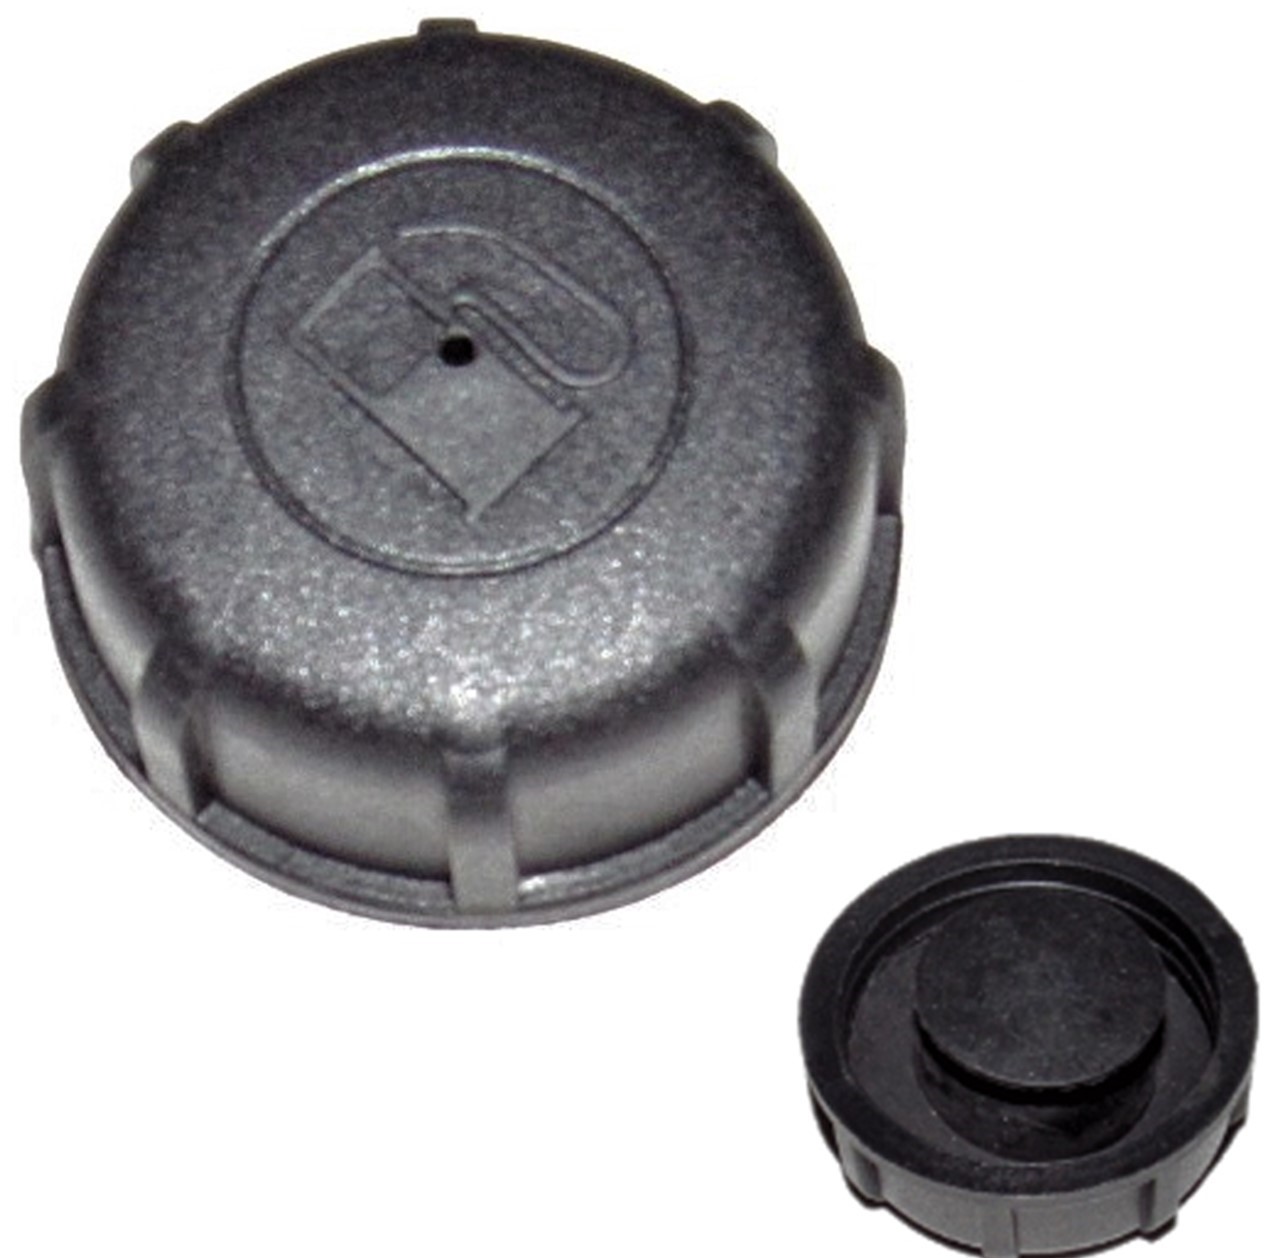 GAS CAP Fits Coleman CT100U, Motovox, and Other Small Mini Bikes and Go Karts.ID= 43mm OD=53mm - Click Image to Close